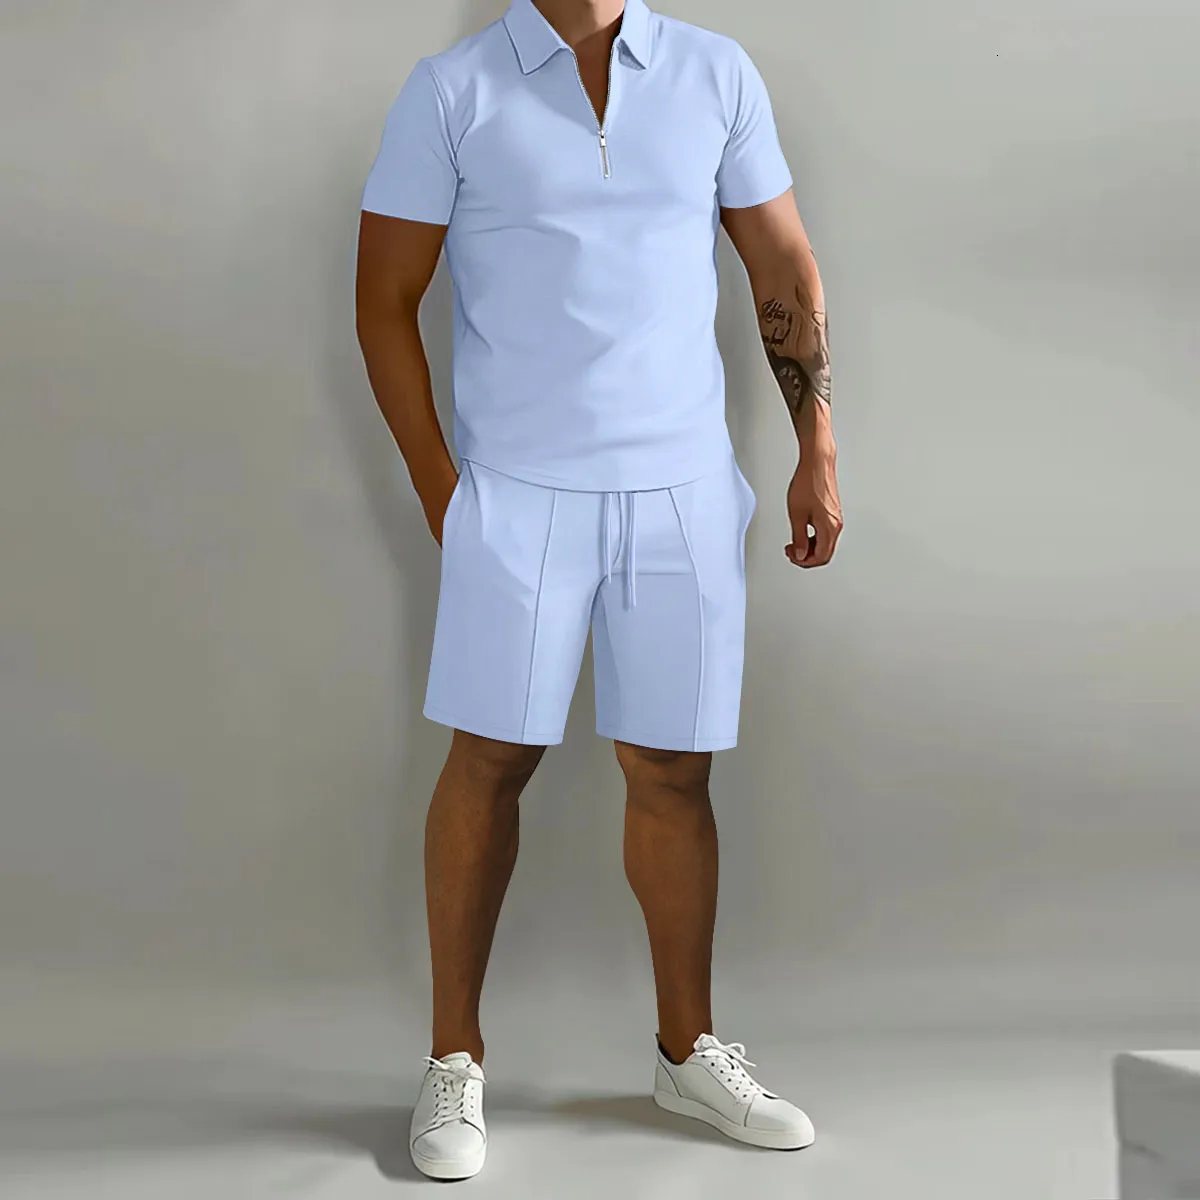 Mens Tracksuits Summer short sleeve Thin Polo ShirtSport Shorts 2 Piece Tracksuit Suit Men Solid Set Casual Jogging Sportswear 230503